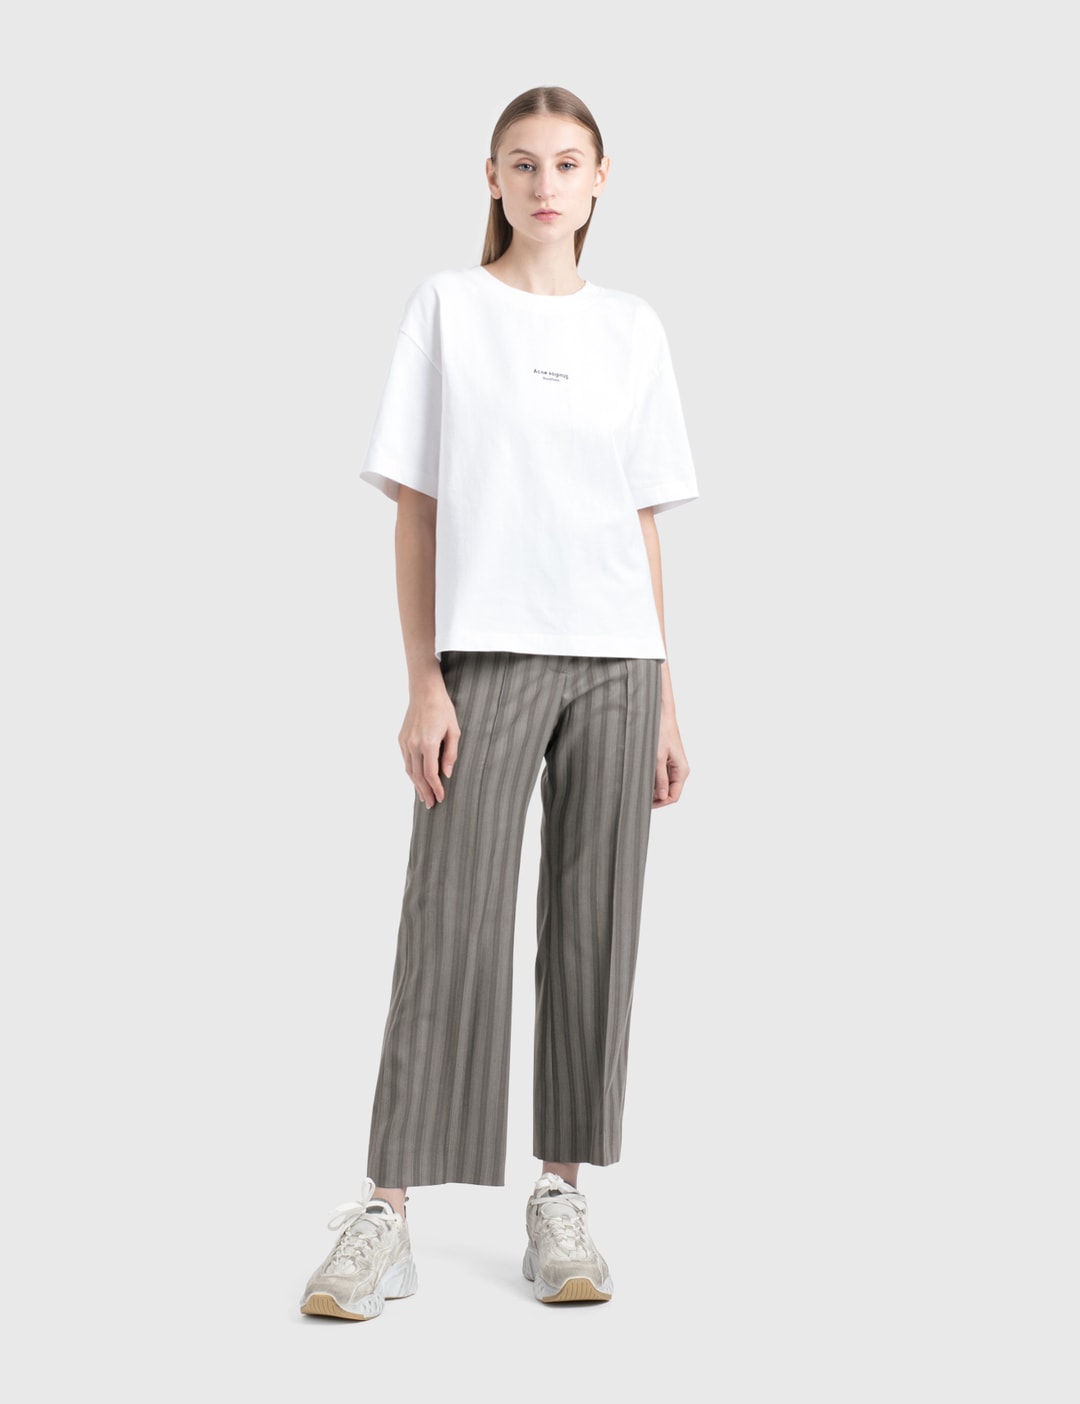 Acne Studios - Flared Pinstripe Trousers | HBX - Globally Curated ...